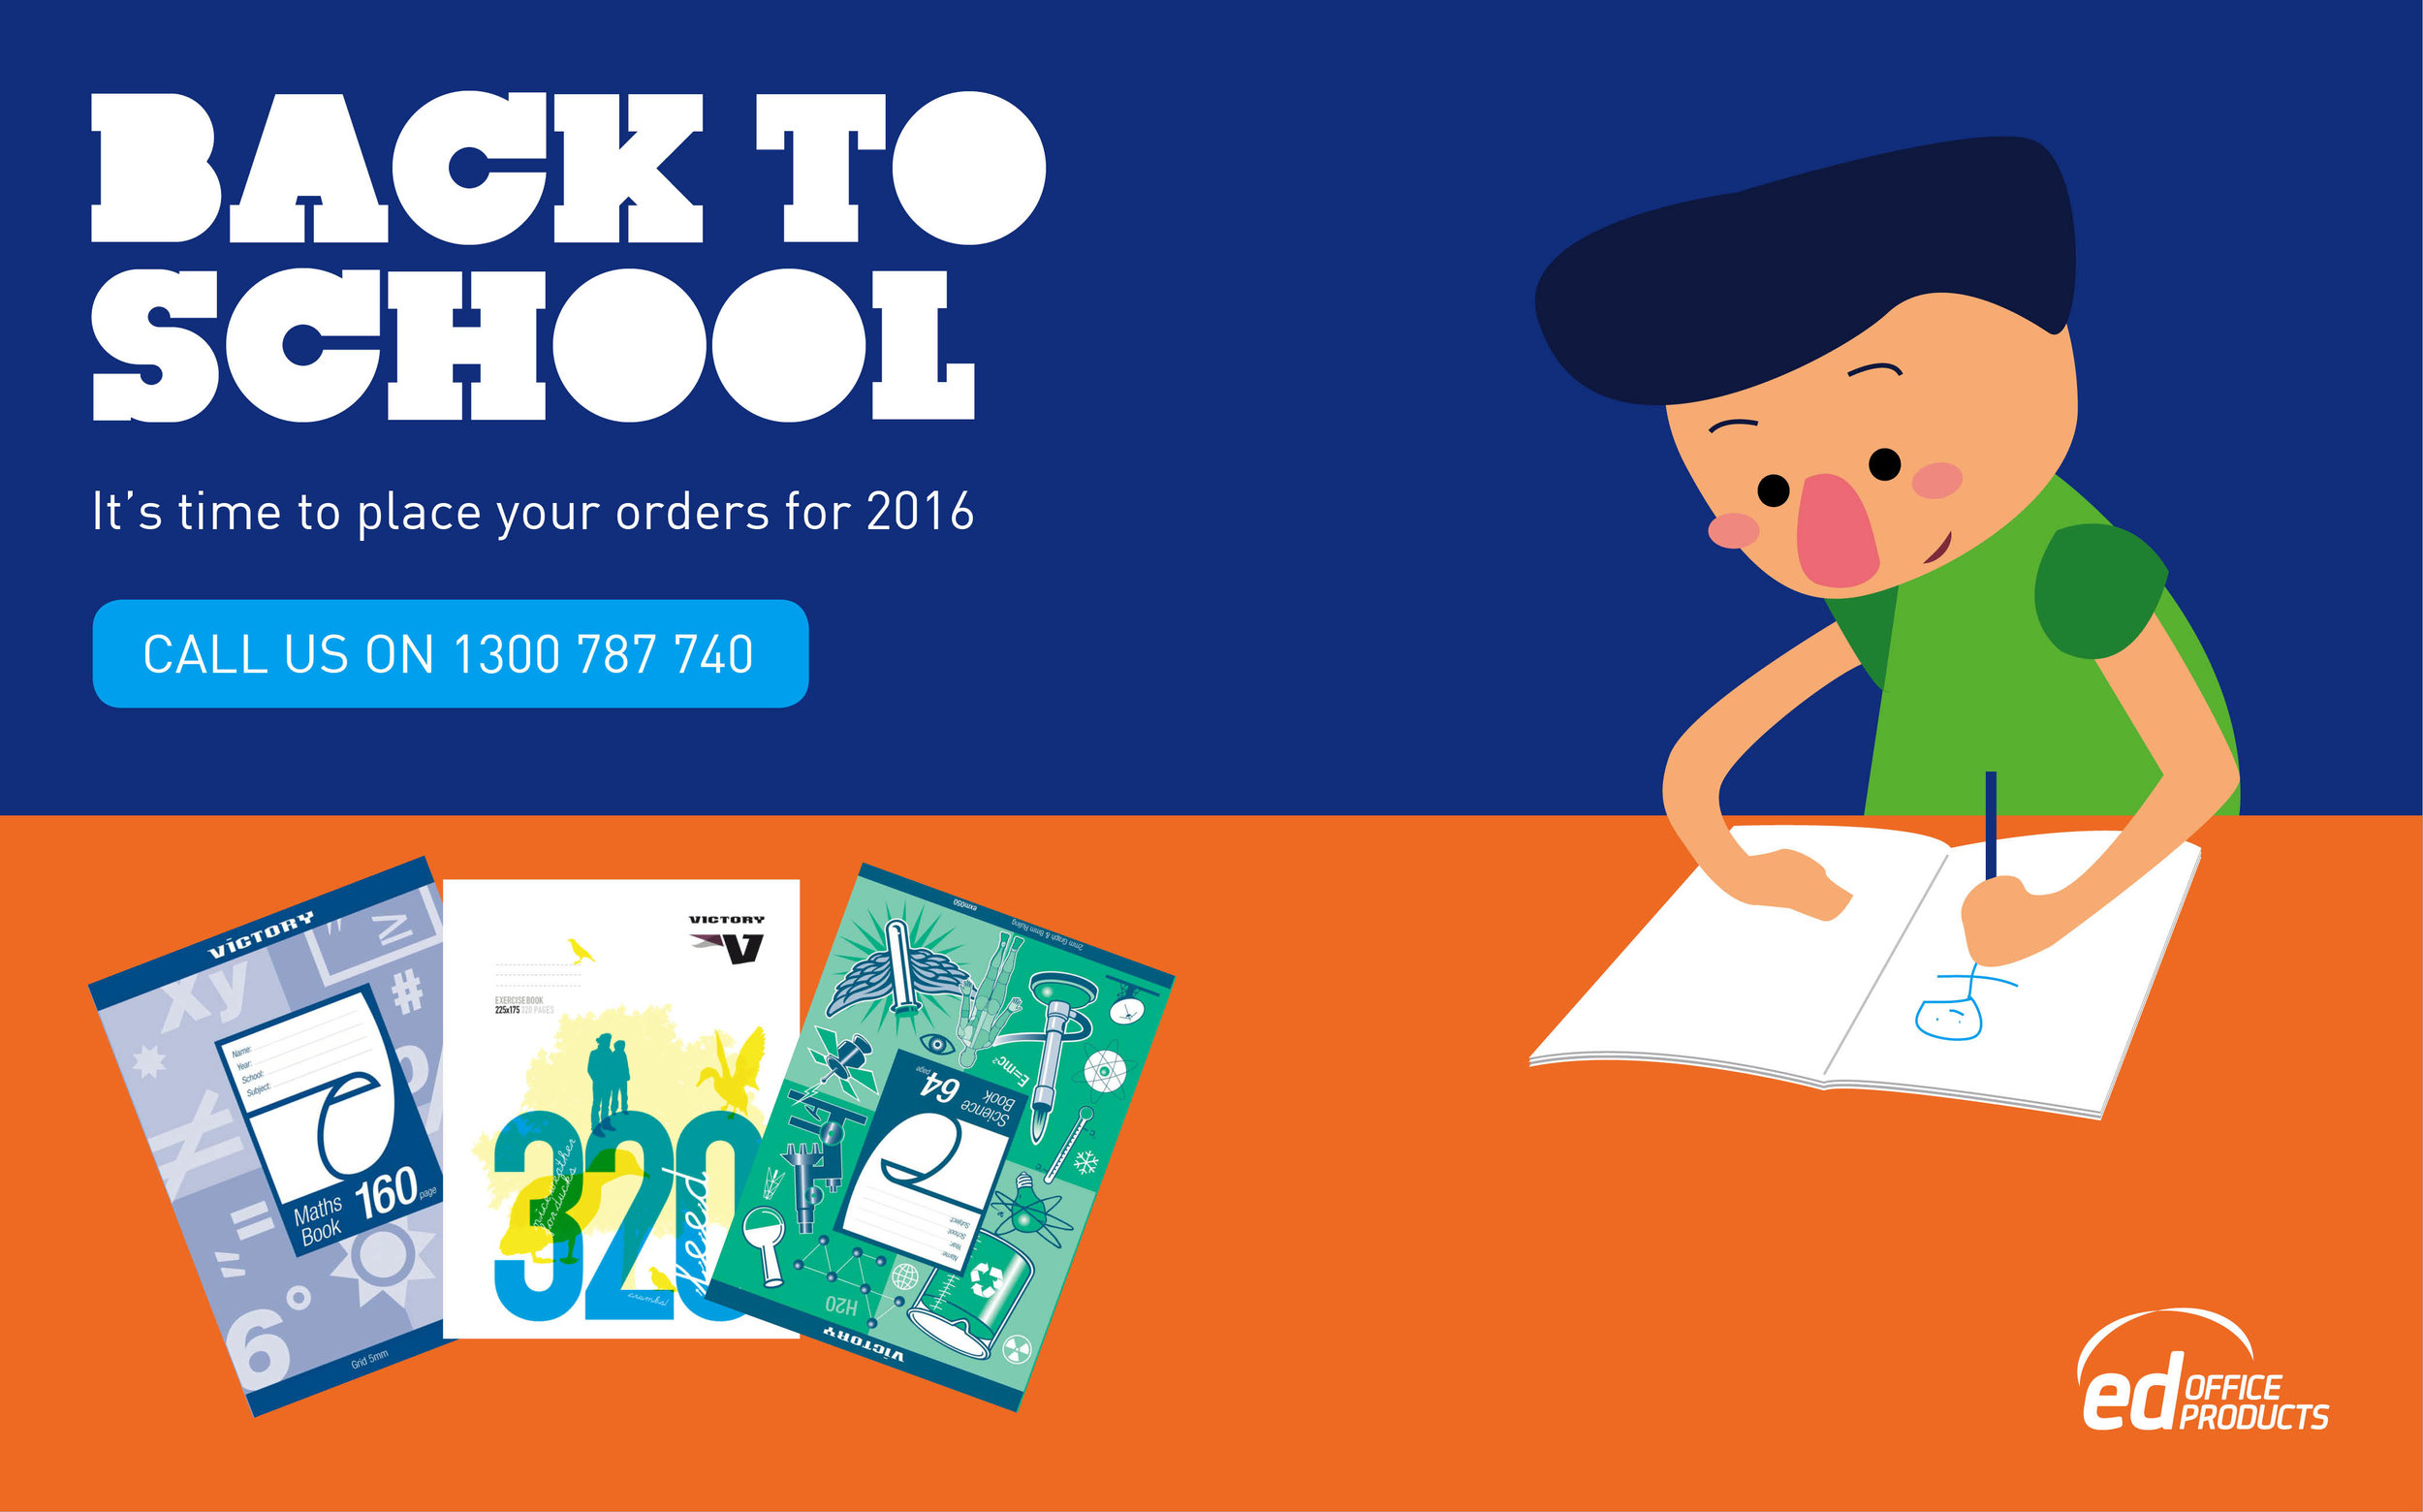 Email Marketing Design - Back to school